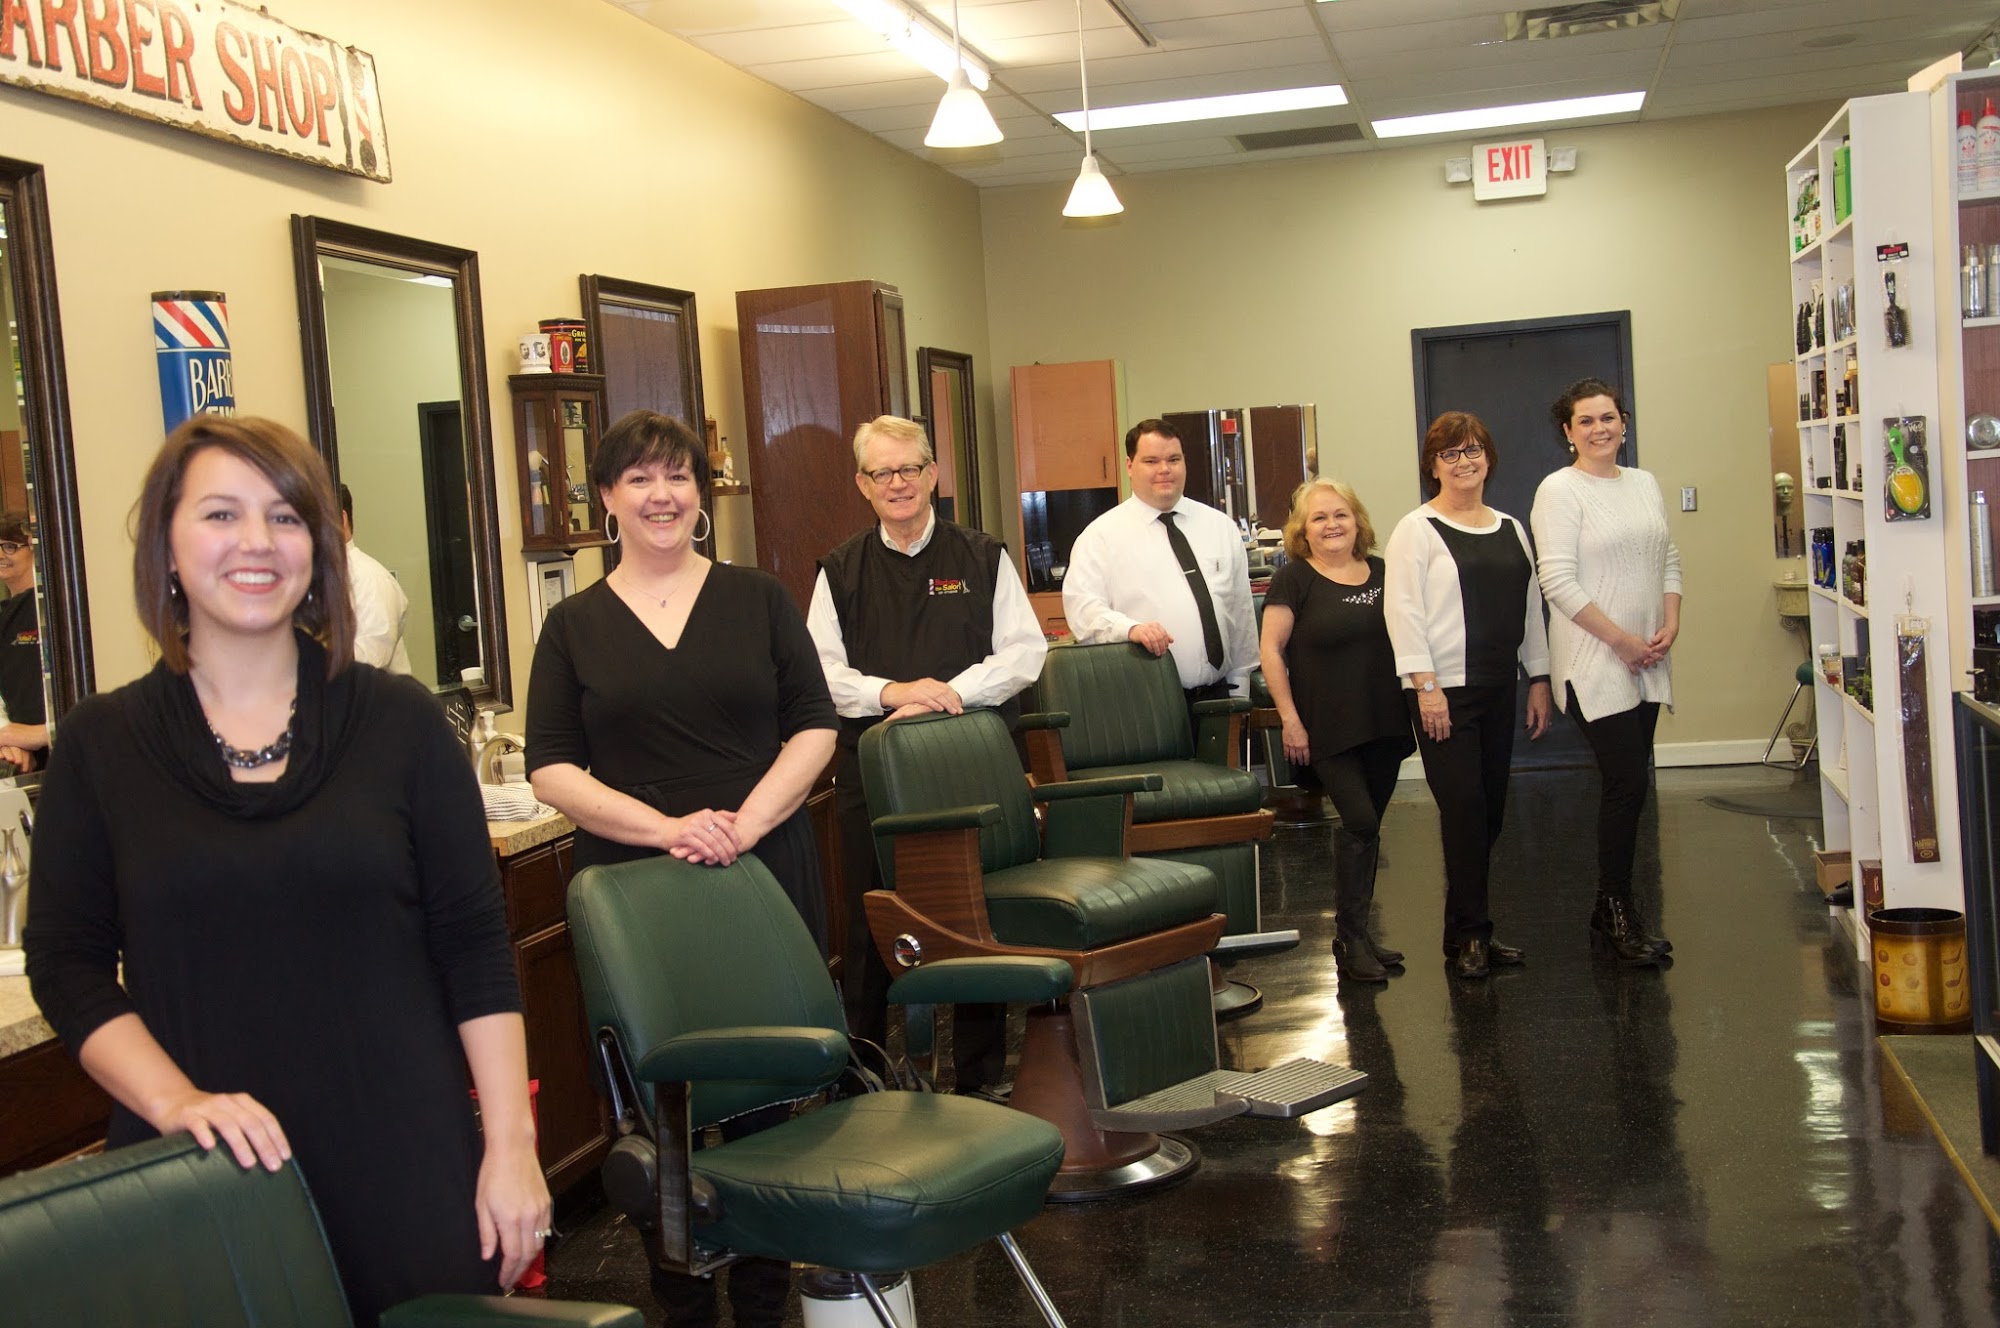 Barbers and the Salon